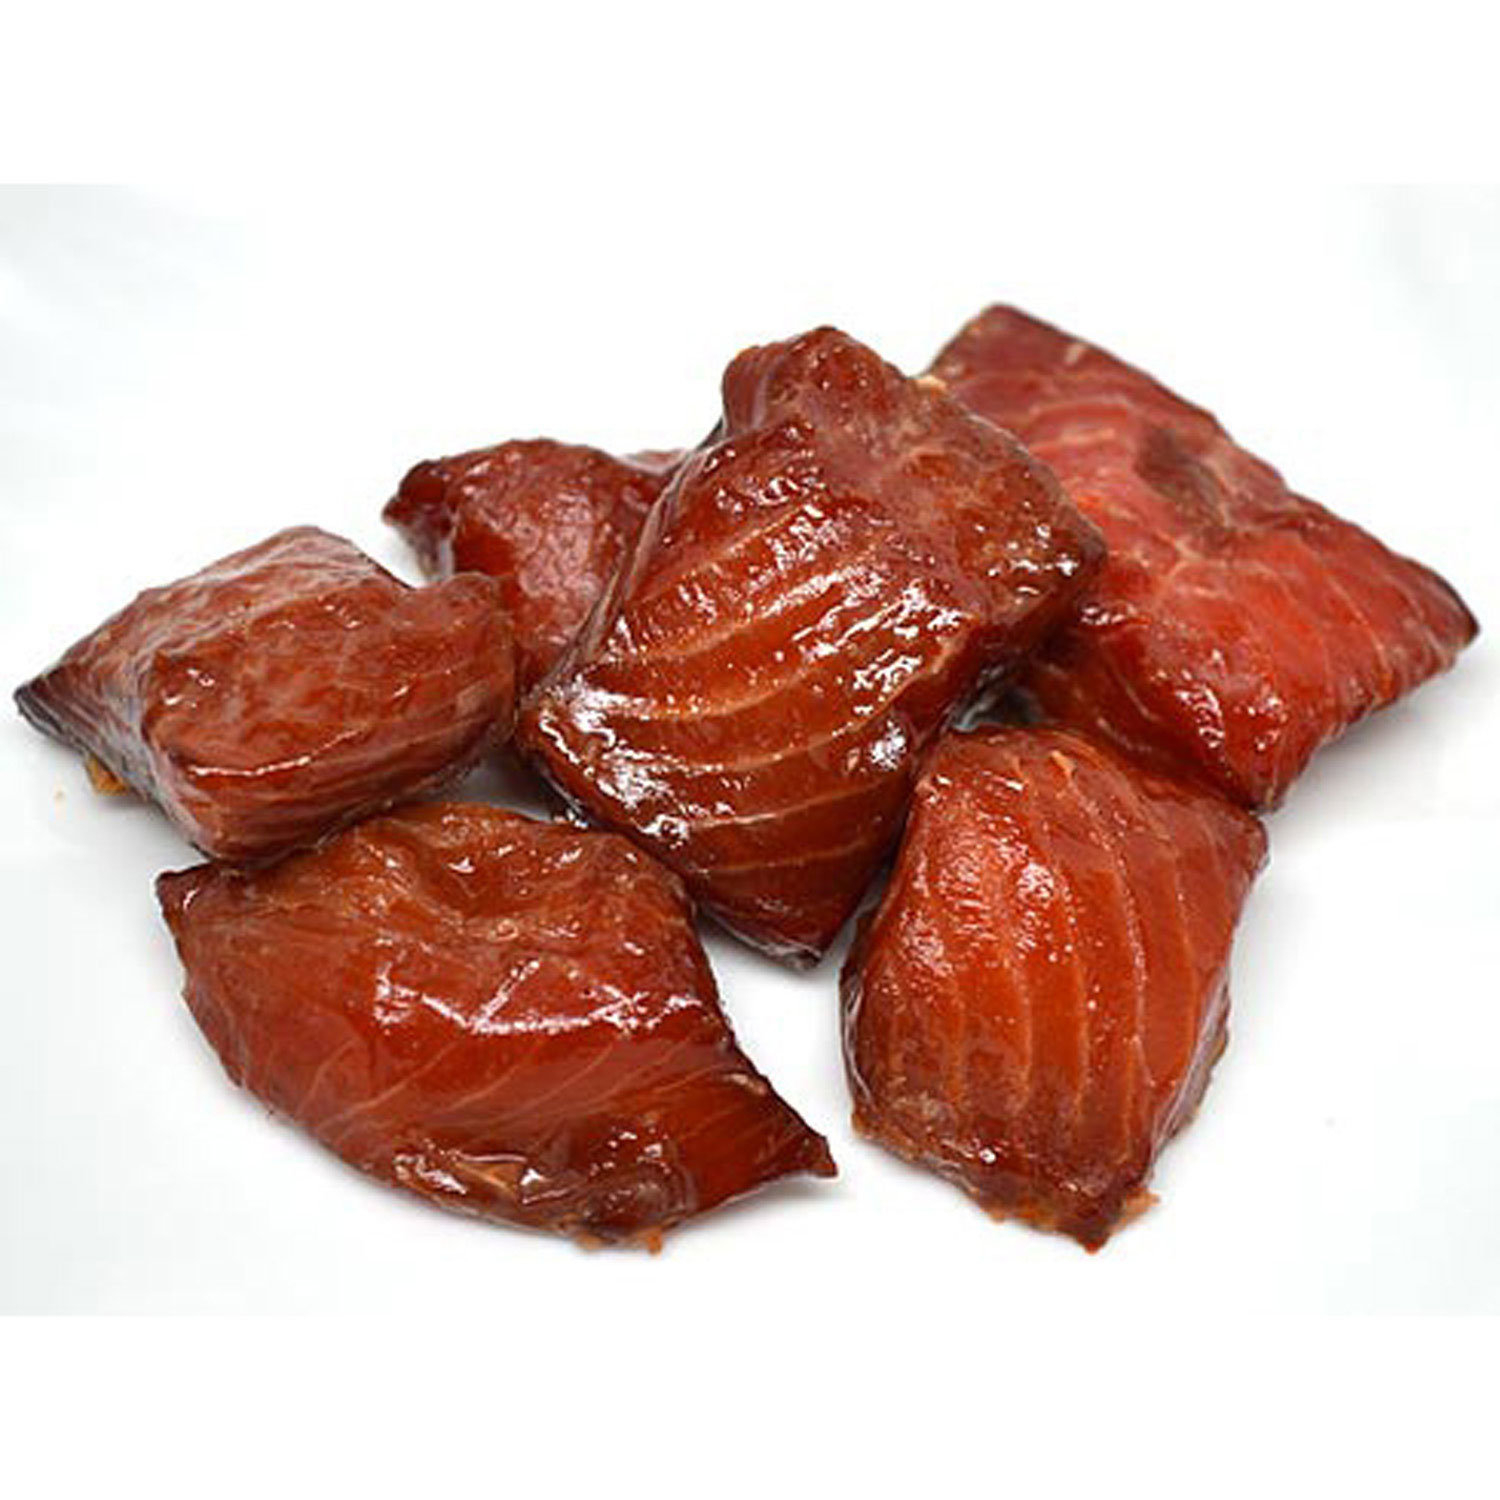 Salmon - Candy Smoked Wild - Choices Markets